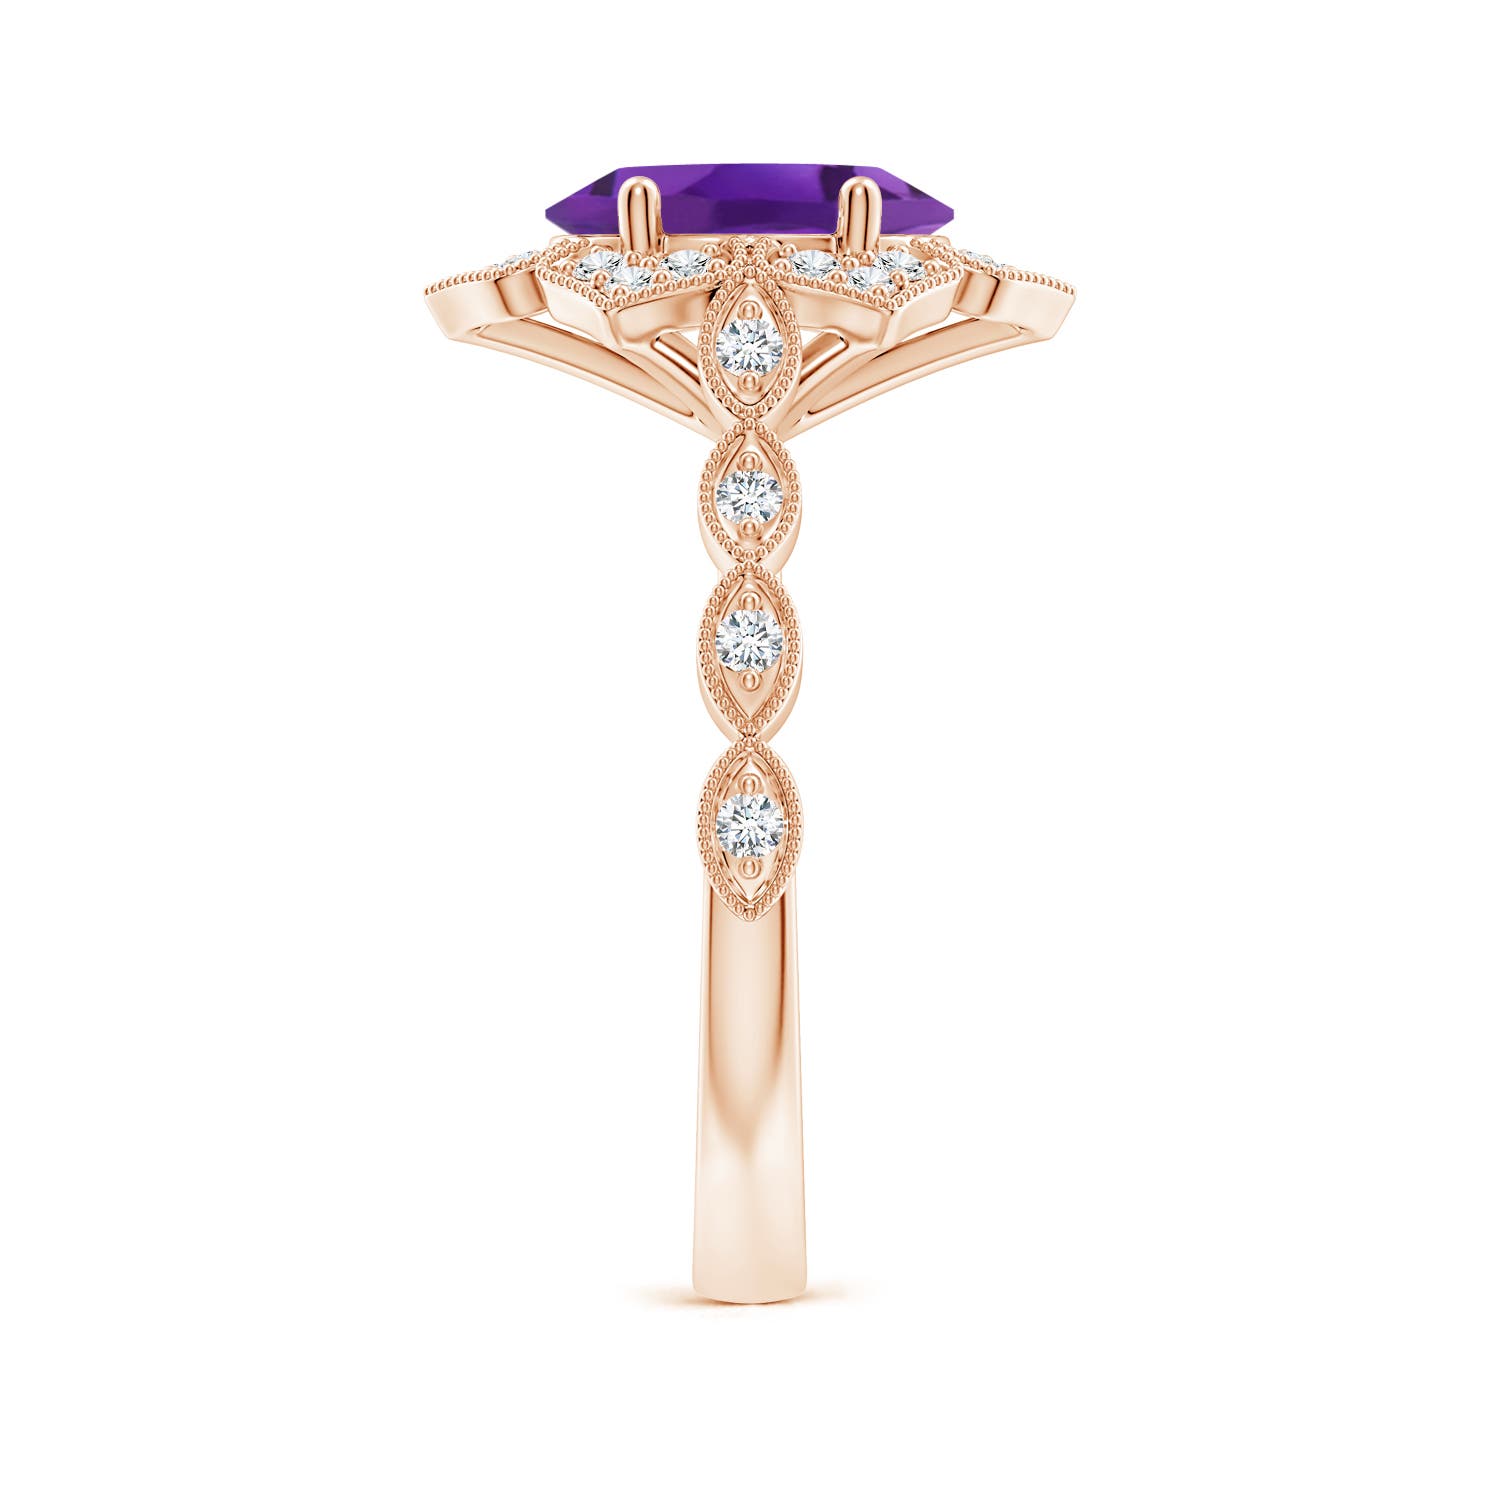 AAA - Amethyst / 1.86 CT / 14 KT Rose Gold